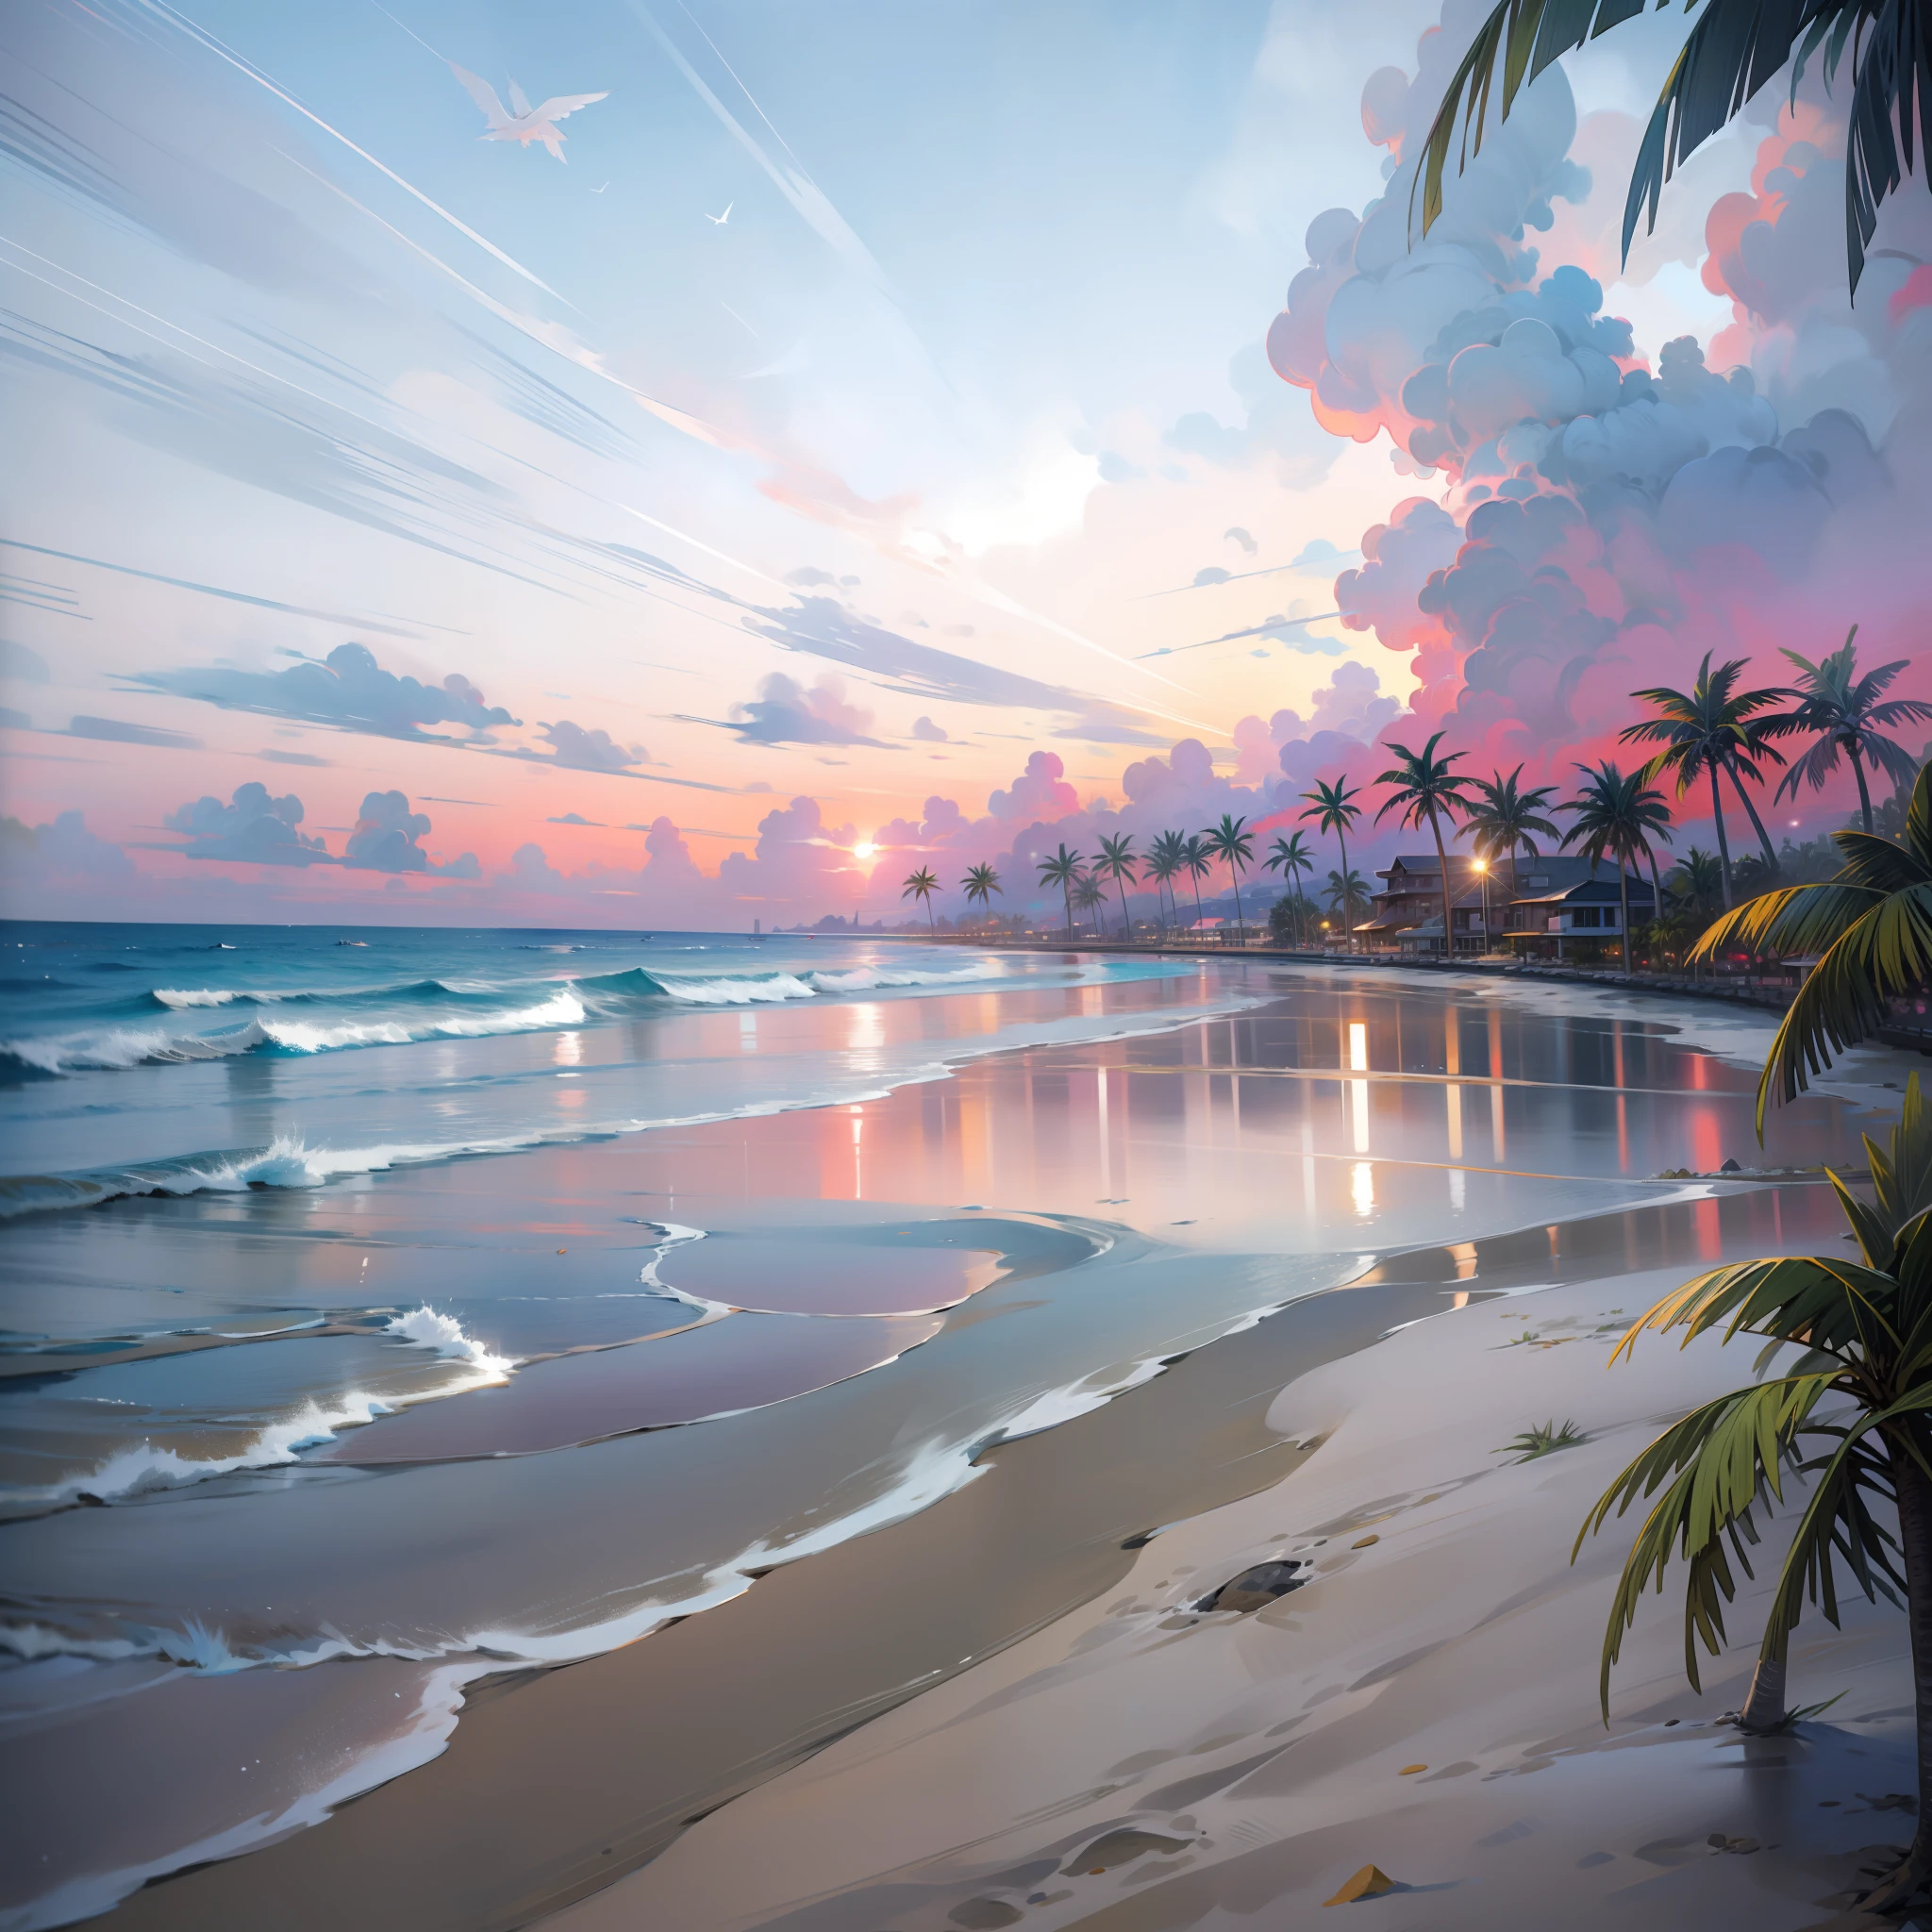 An absolutely mesmerizing sunset on the beach with a mix of orange, pink and yellow in the sky. The water is crystal clear, gently kissing the shore, and the white sand beach stretches as far as the eye can see. The scene is dynamic and breathtaking, with seagulls soaring high in the sky and palm trees gently swaying. Soak up the calm atmosphere and let the tranquility envelope.